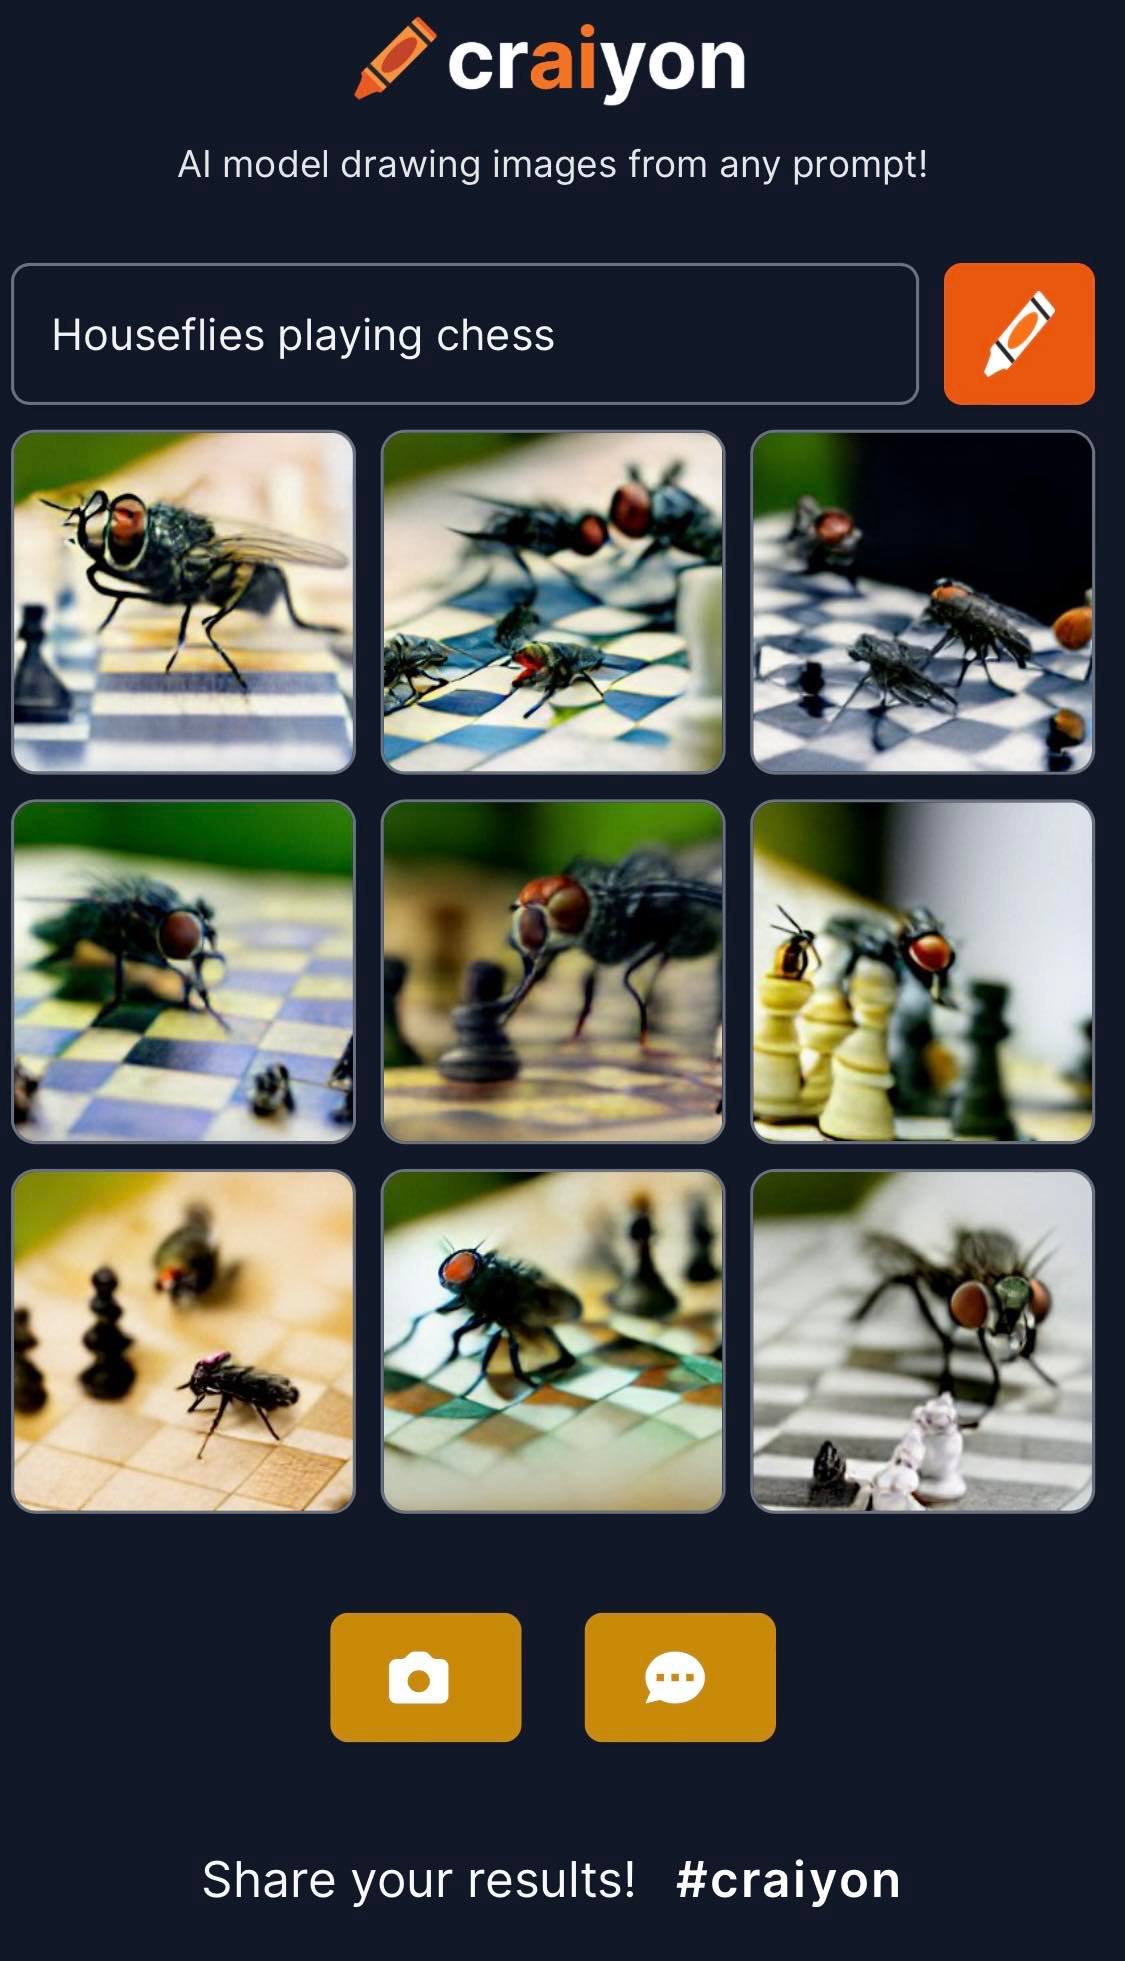 A 'Craiyon prompt', an AI drawing of the phrase 'houseflies playing chess', and showing a set of nine unusual drawings of houseflies playing chess, most of the images have the houseflies as slightly larger than the chess pieces, and generally it's of one or multiple houseflies standing on a chess board, facing one of the pieces.